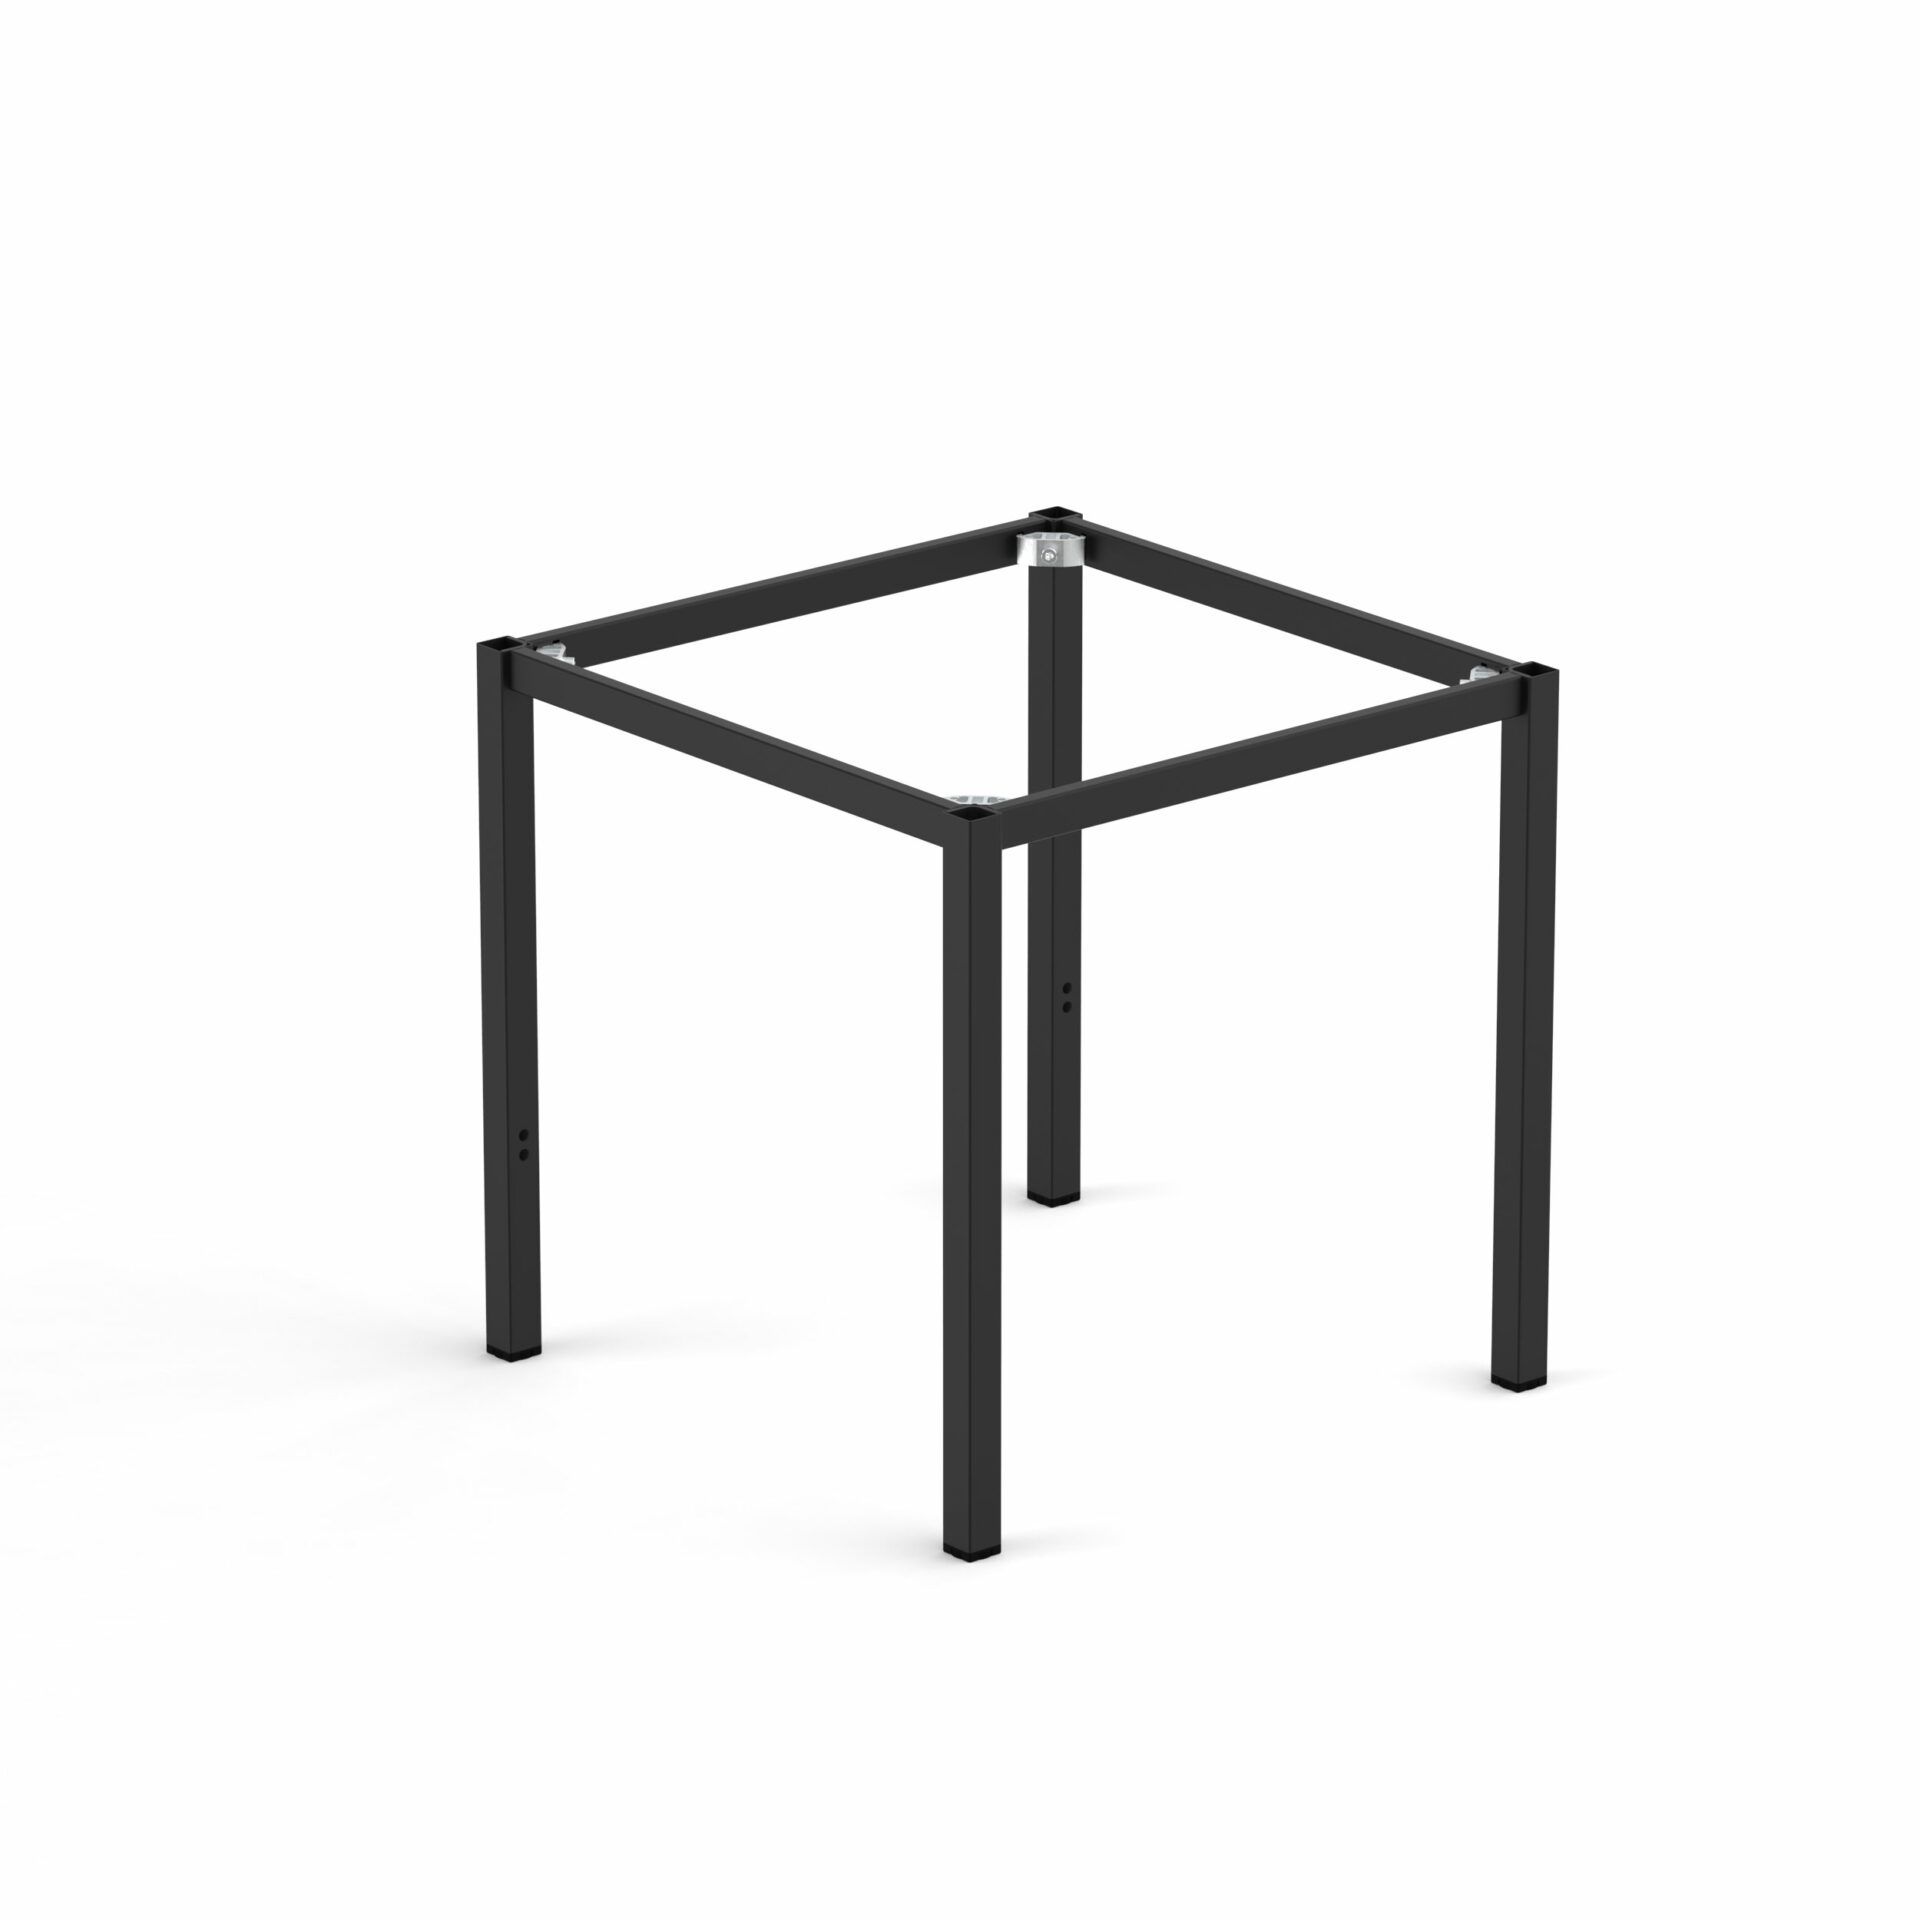 Spire Square leg Table Height Frame 990 x 590 x 720H